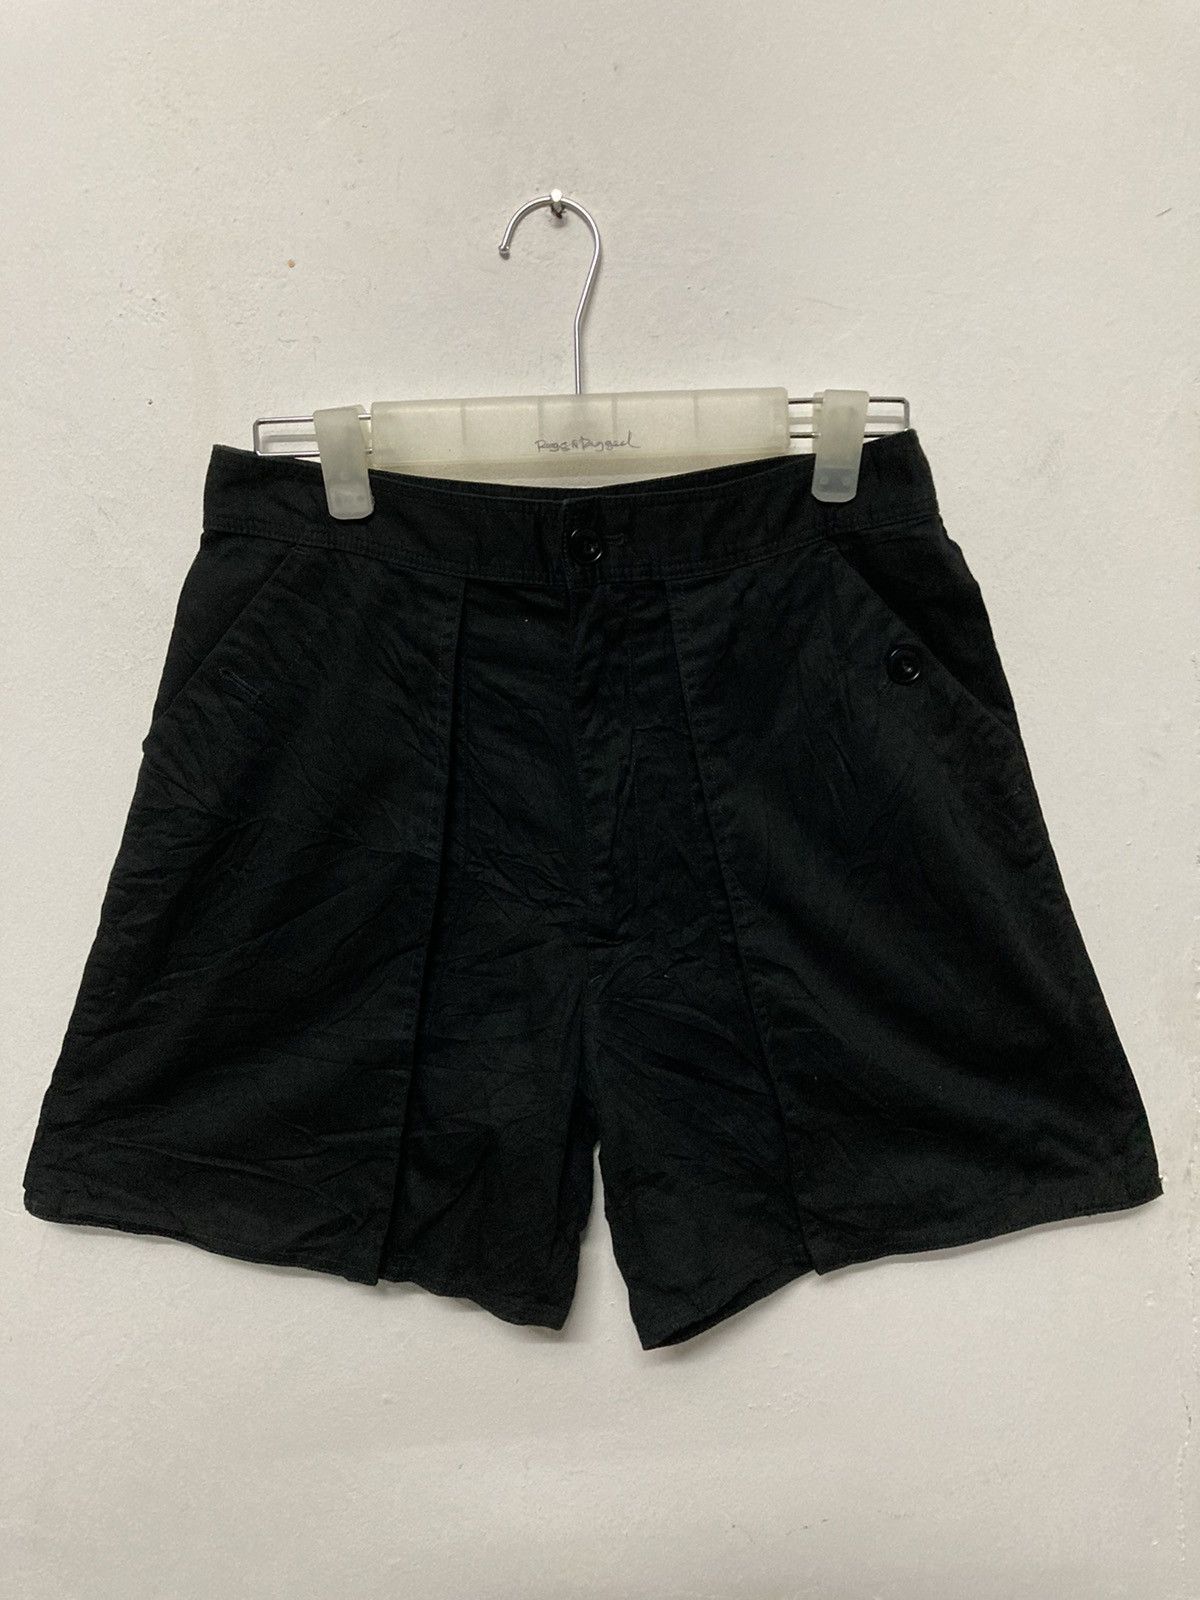 Uniqlo and Lemaire Short Pants - 1